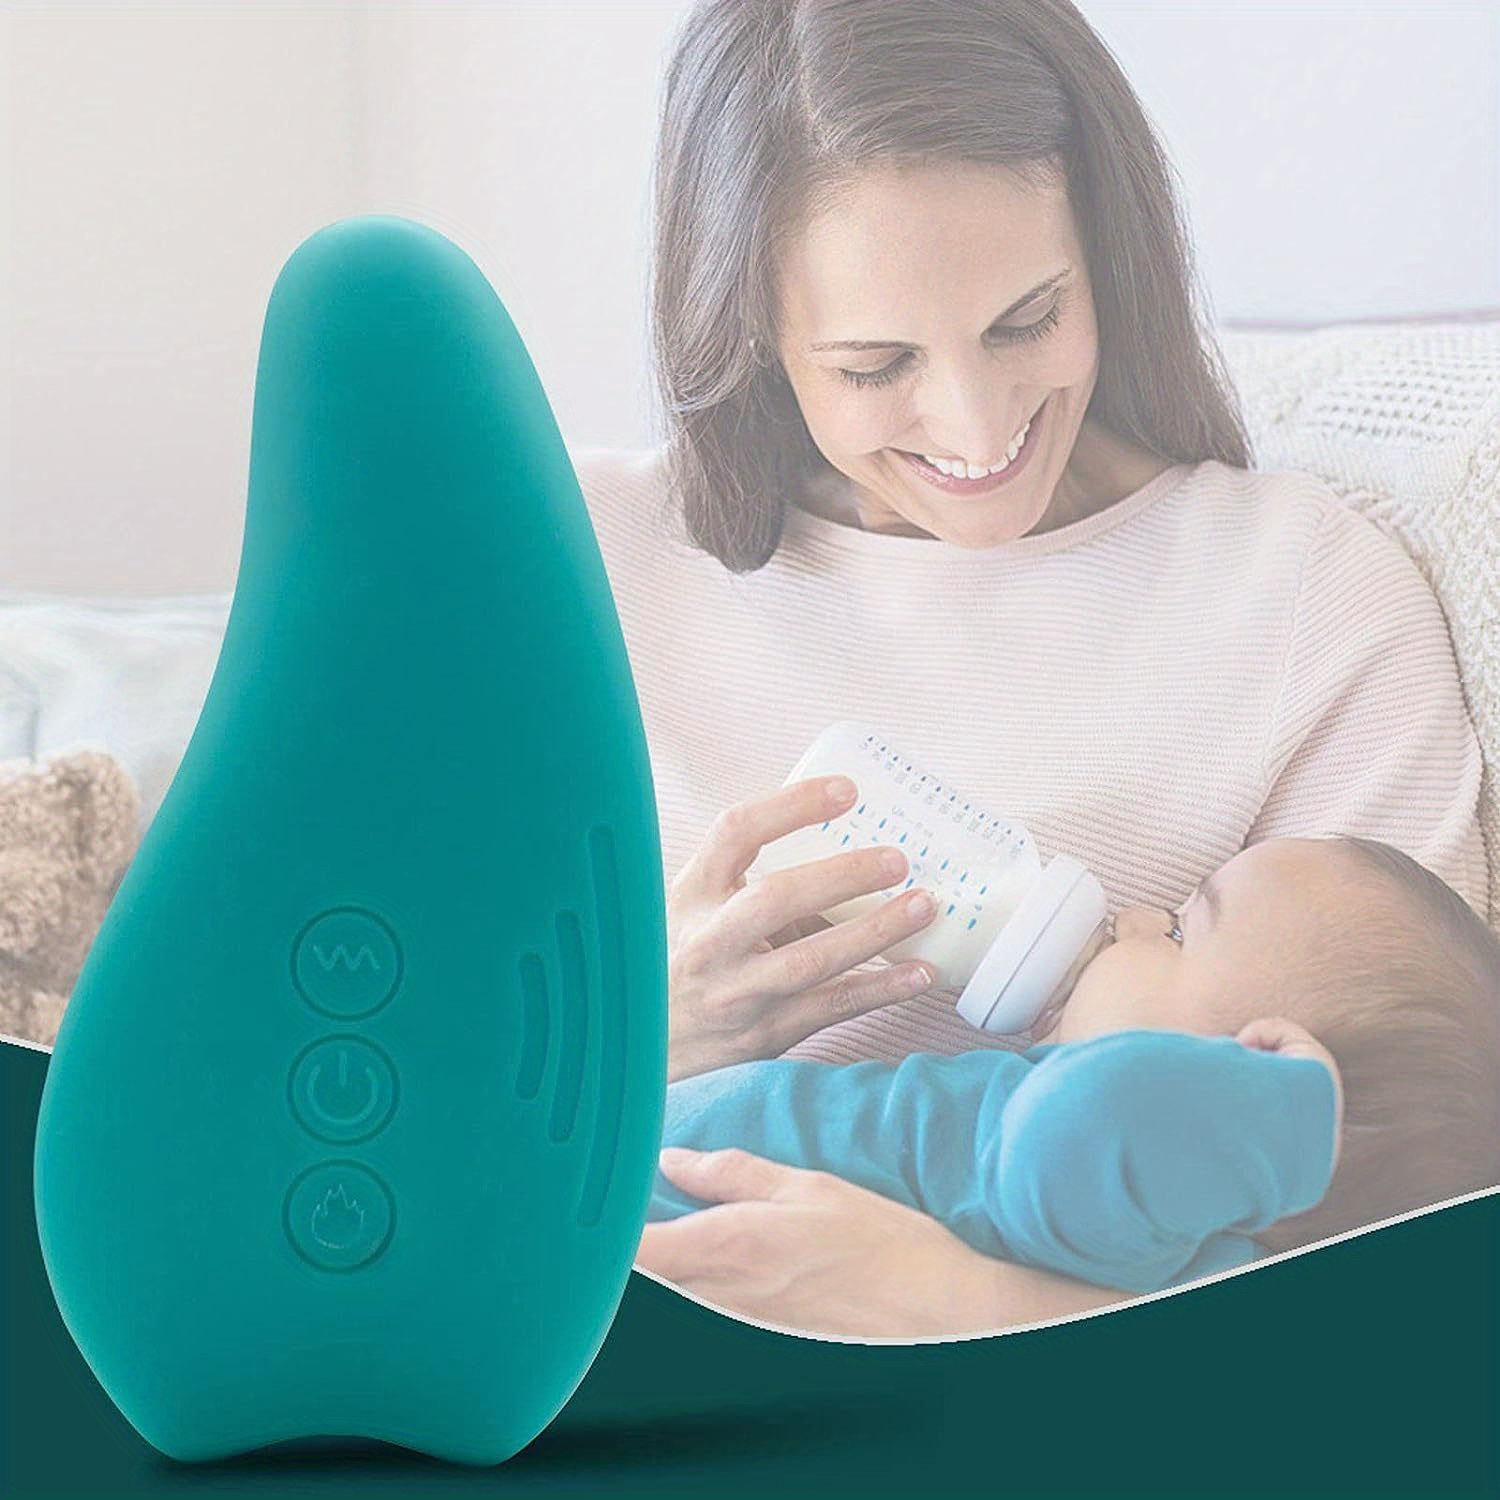 Silicone Breast Massager with Heat and Vibration for Breastfeeding -  ASPJ1064 - IdeaStage Promotional Products